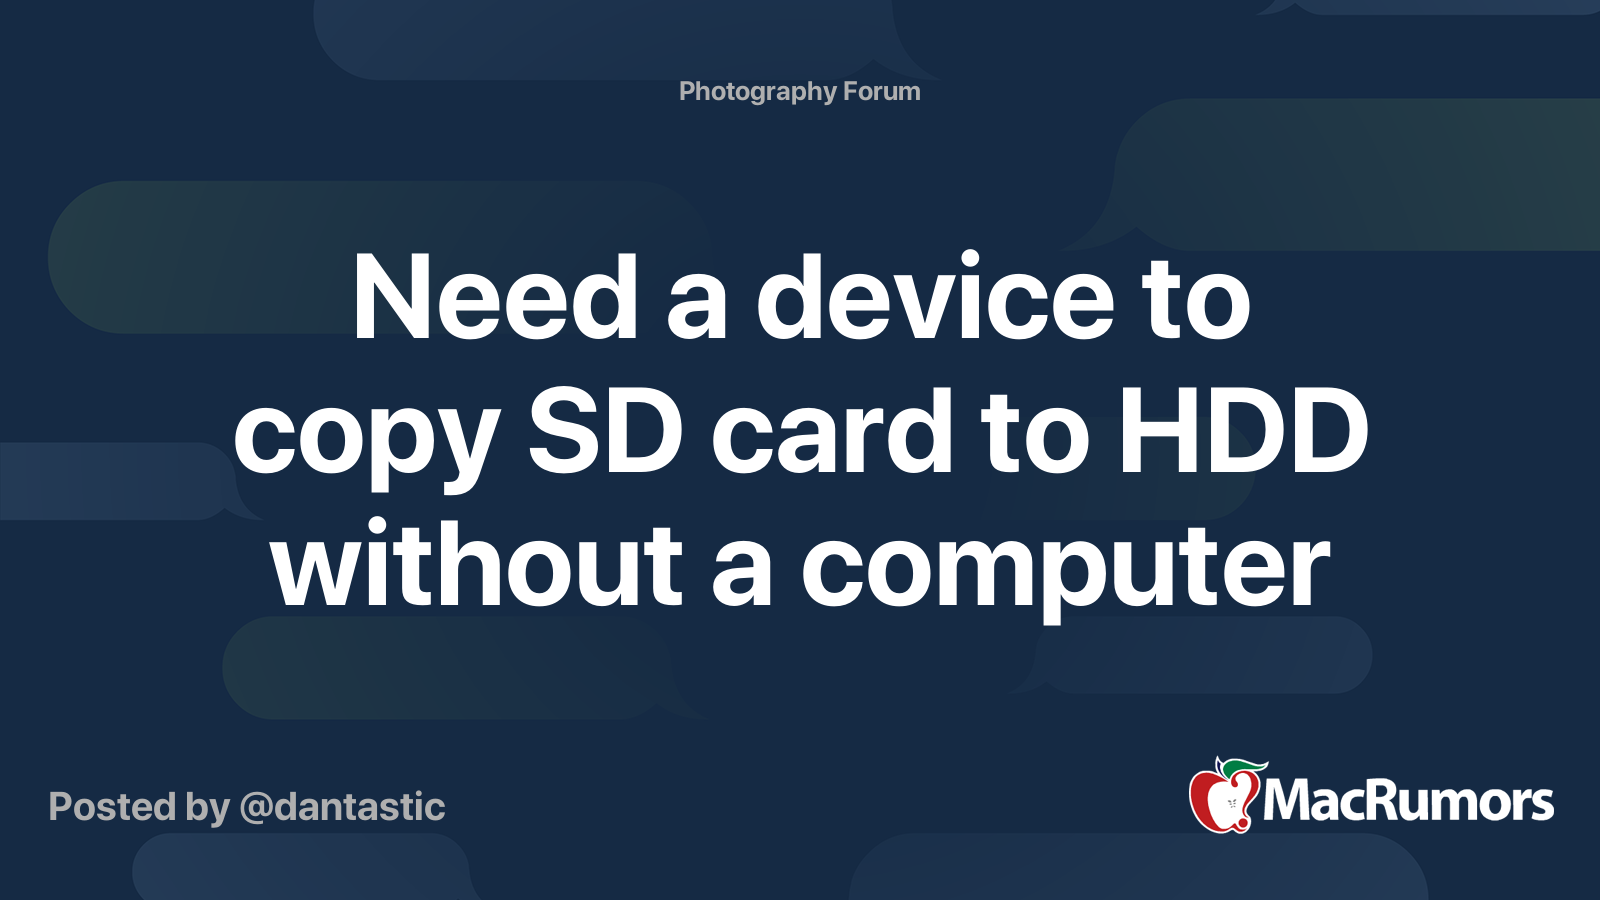 produceren marmeren Stap Need a device to copy SD card to HDD without a computer | MacRumors Forums